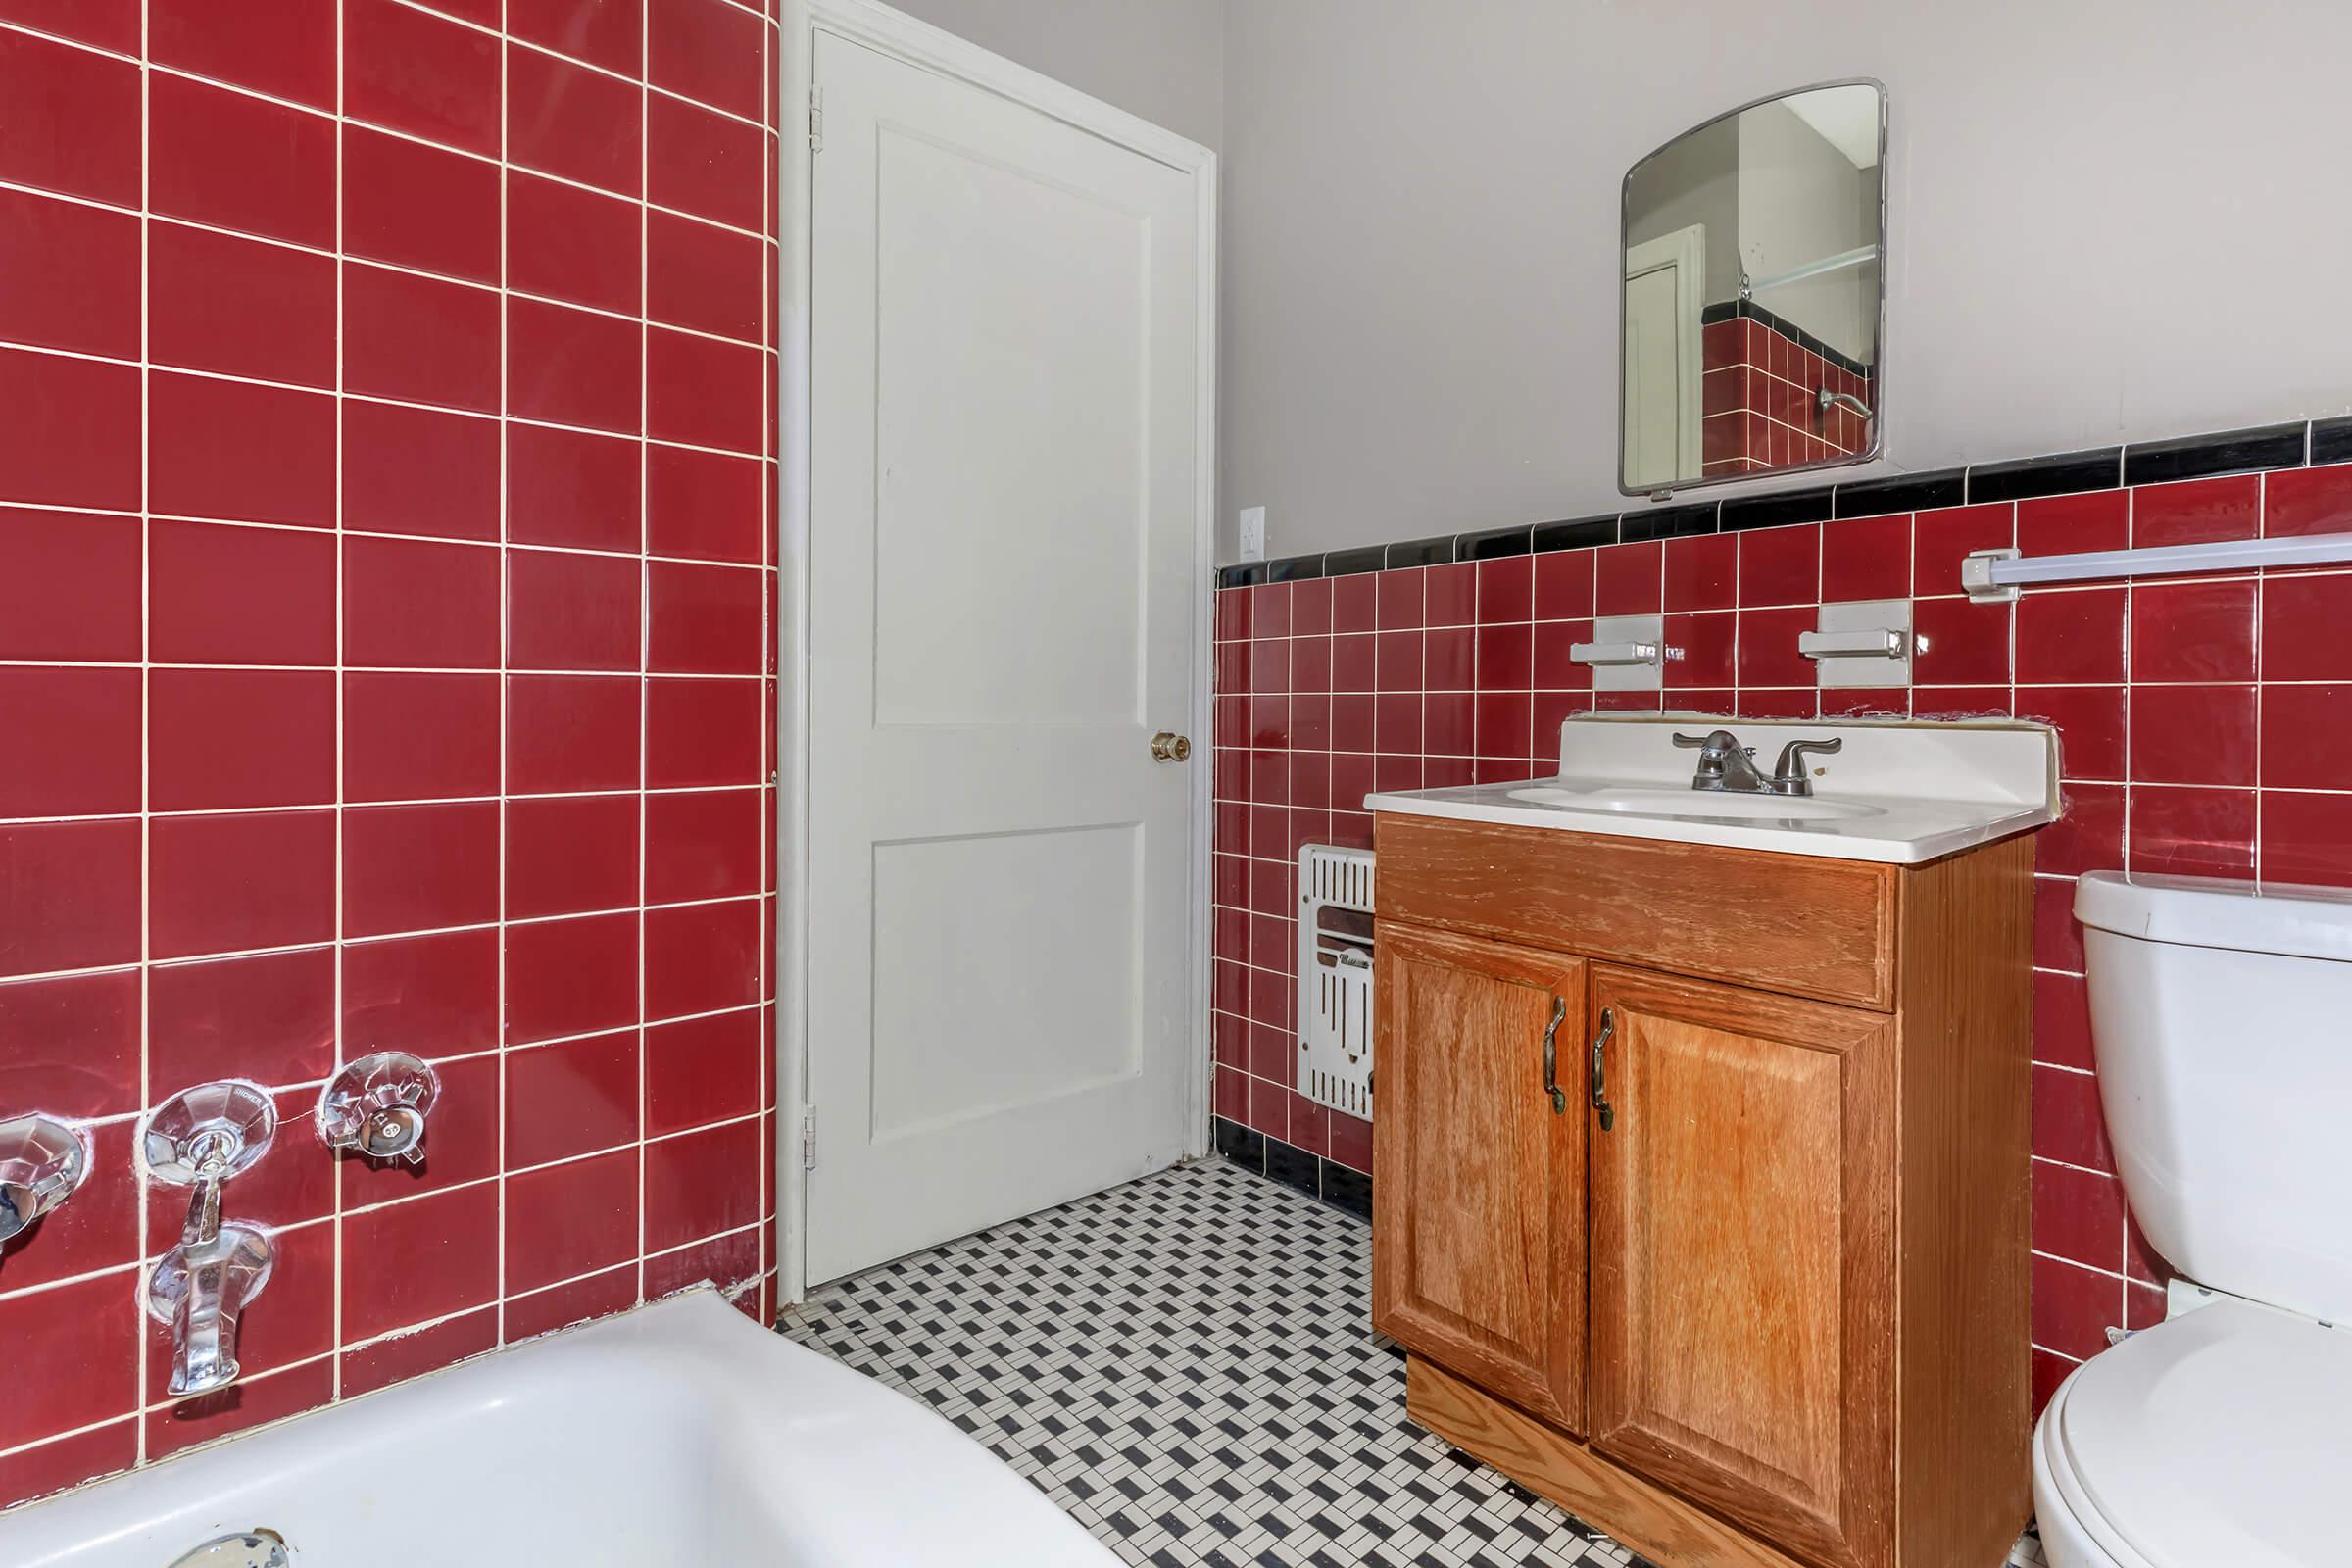 a red cabinet next to a sink